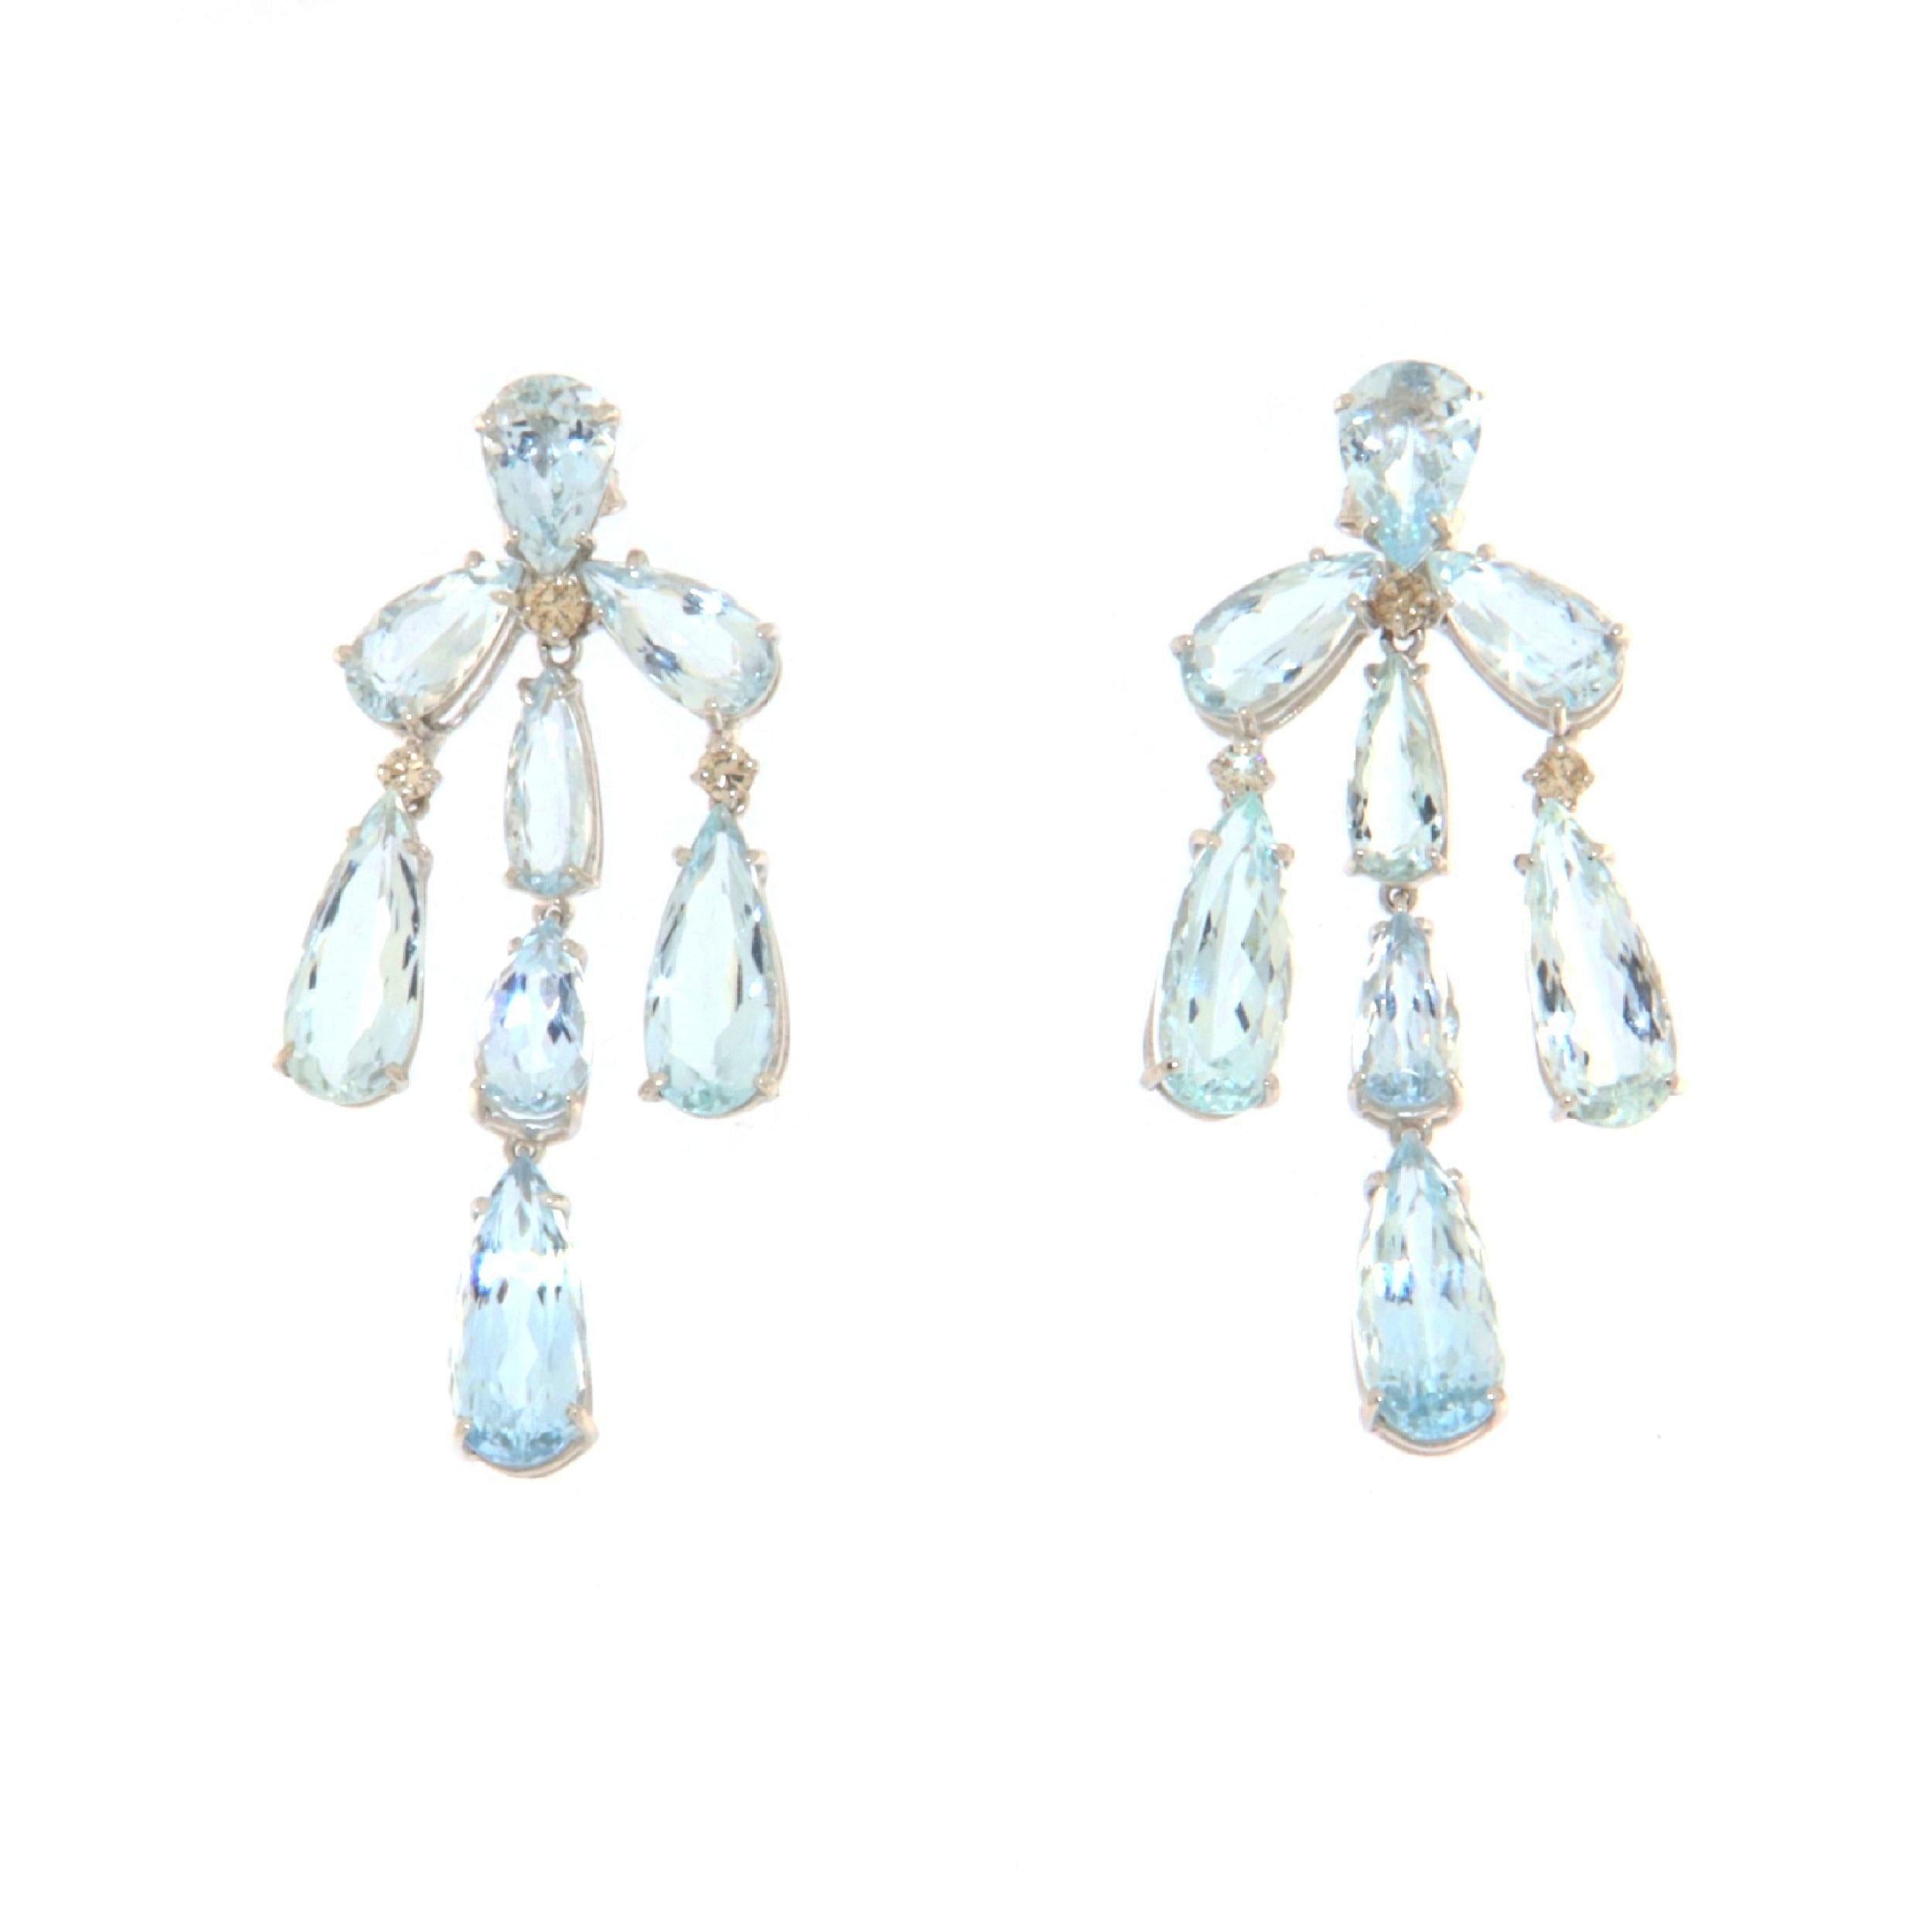 These stunning earrings, crafted from 18-karat white gold, showcase a breathtaking design that marries the serene beauty of Brazilian aquamarines with the dazzling sparkle of brilliant diamonds. Each earring features elegantly cut teardrop